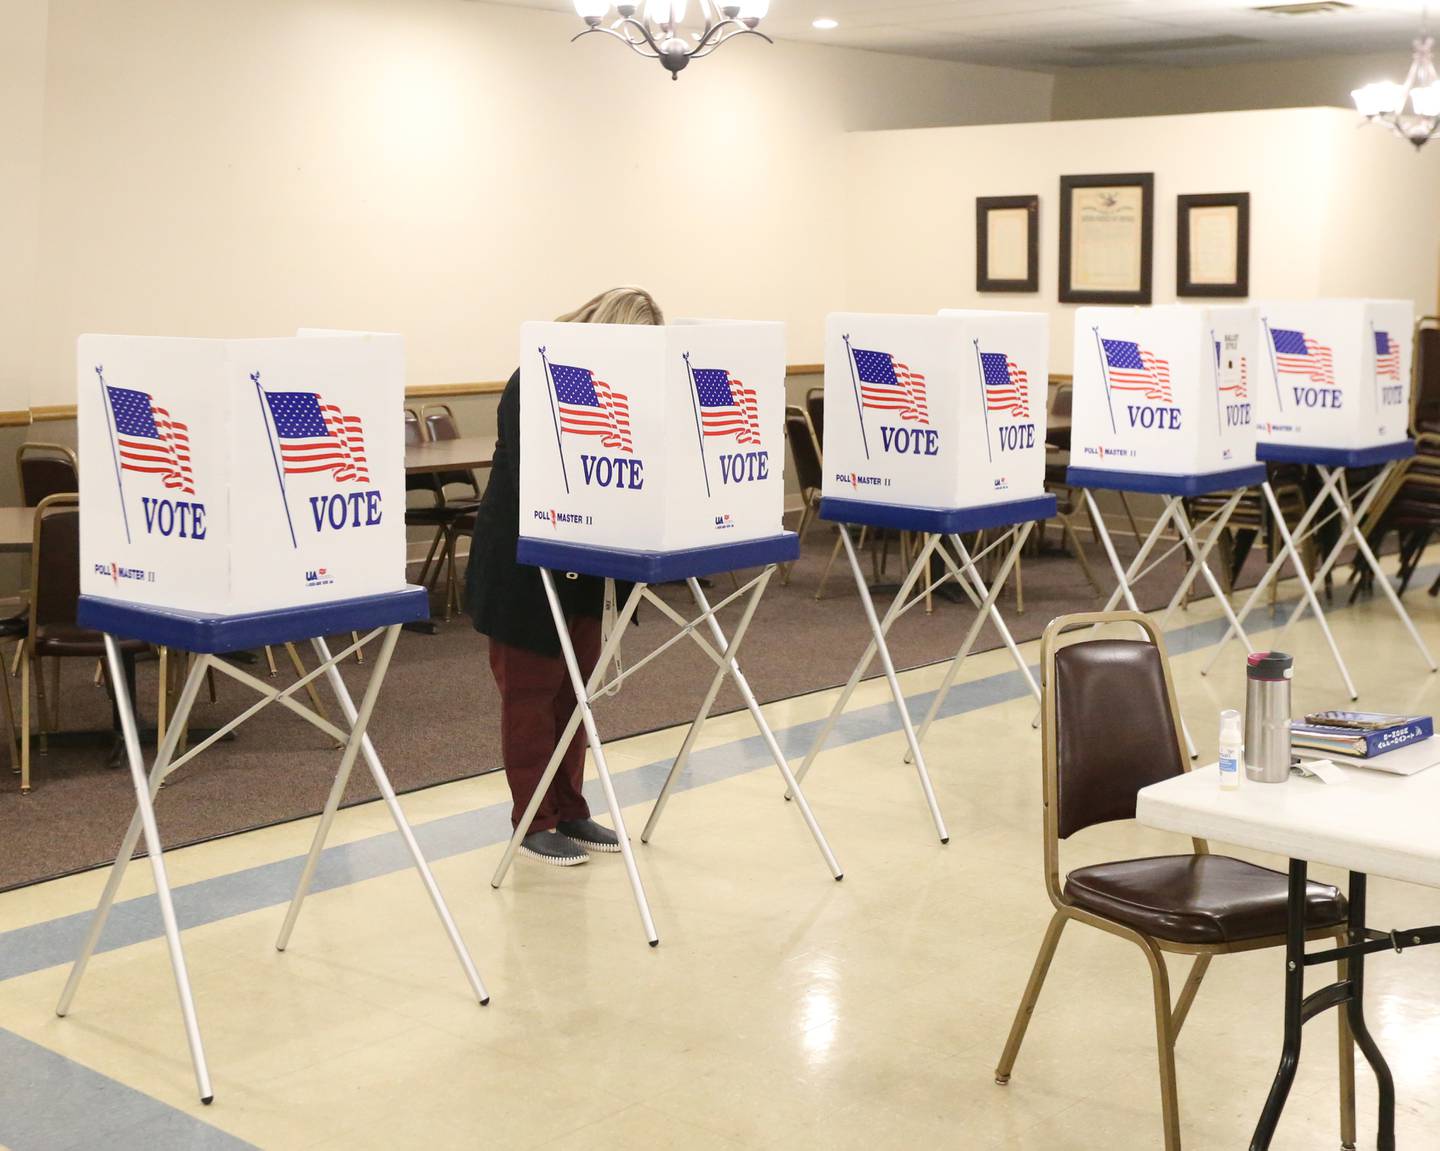 A single voter votes in a voting booth at the Moose Lodge on Tuesday, April. 4, 2023 in Princeton.